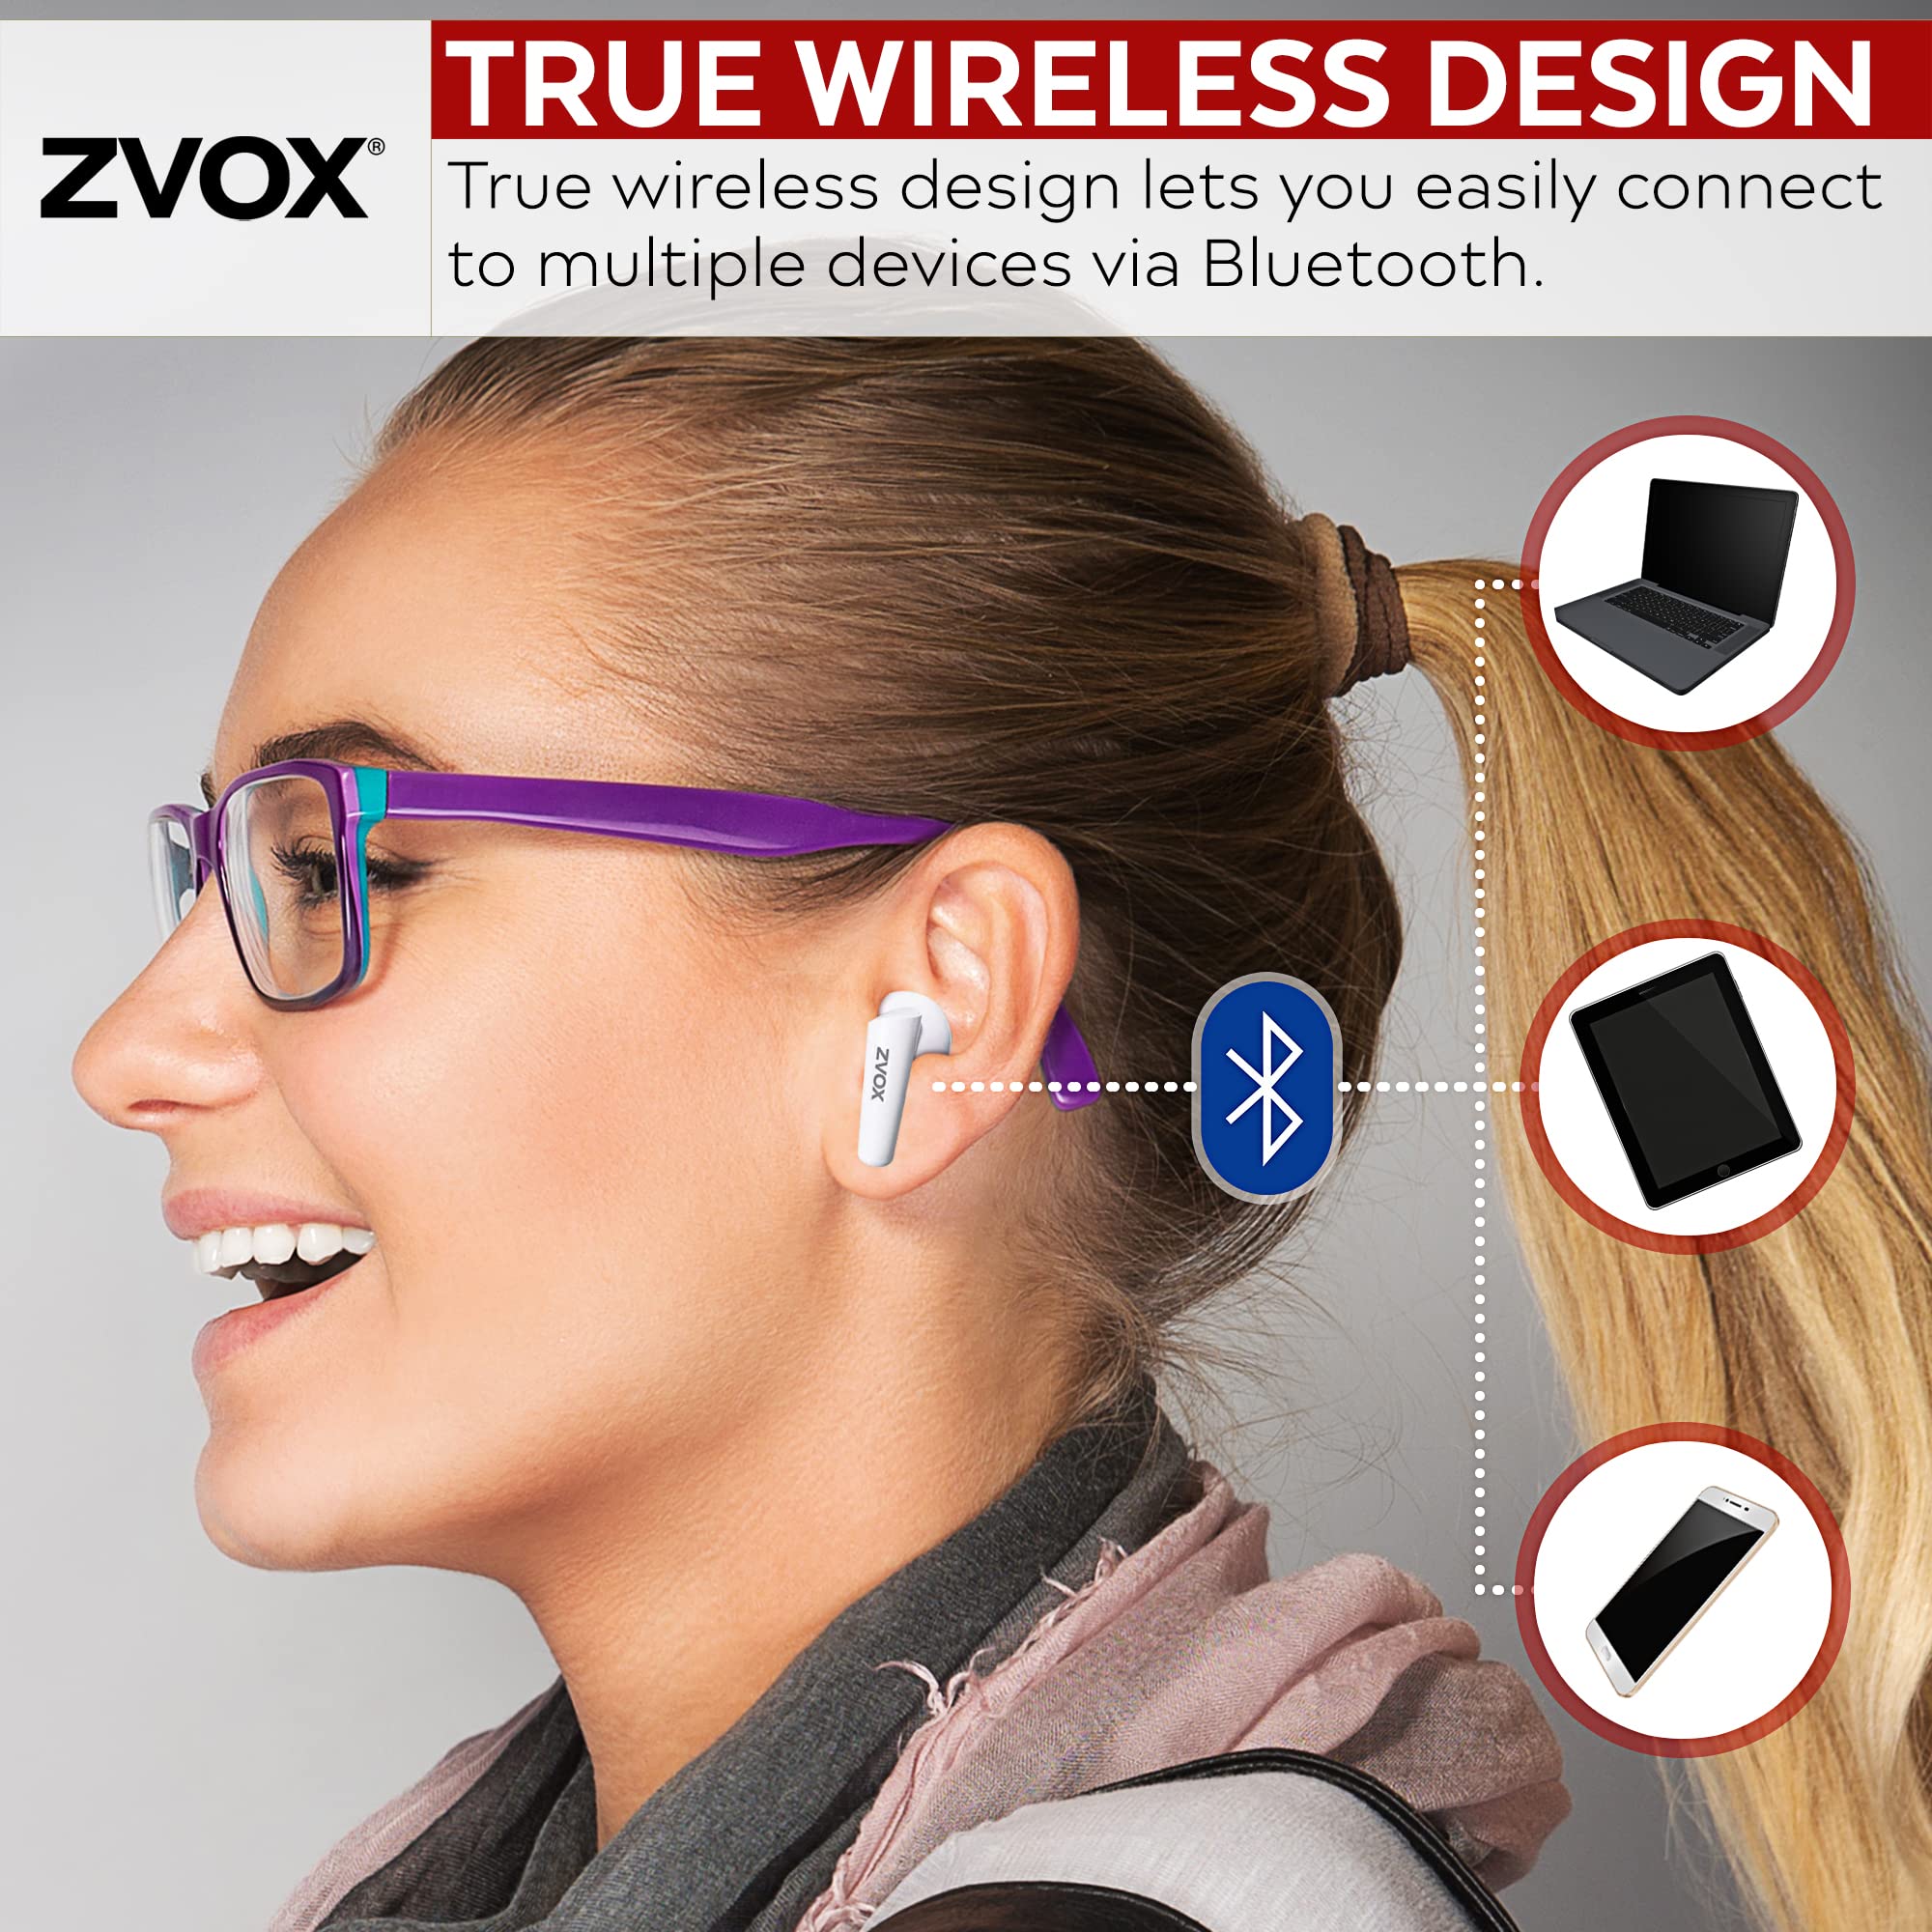 ZVOX True Wireless Earbuds with AccuVoice Technology - Voice-Clarifying, Noise-Canceling Bluetooth Wireless Headphones, AV30 Connect to Multiple Devices, Earbuds Wireless Bluetooth - White